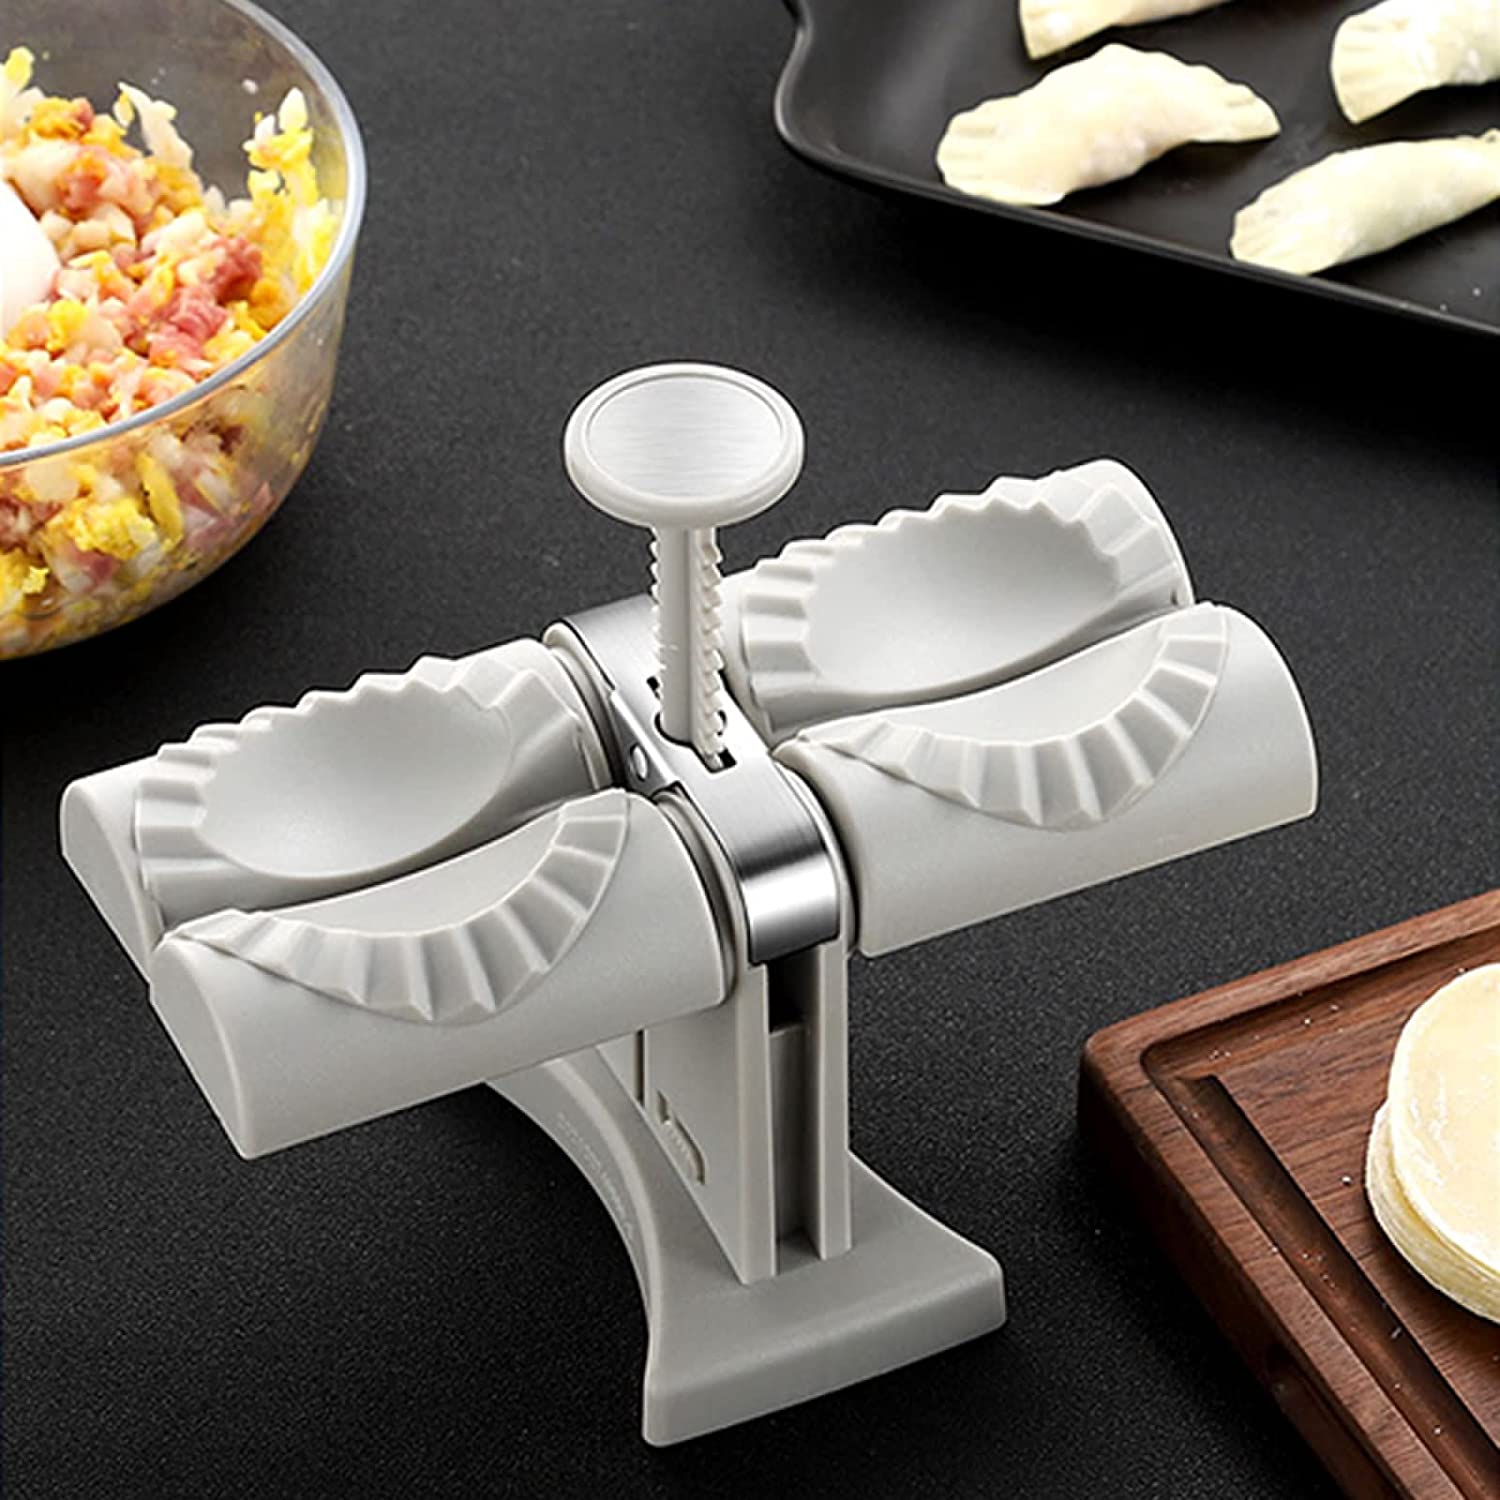 manual onion slicer for making blooming